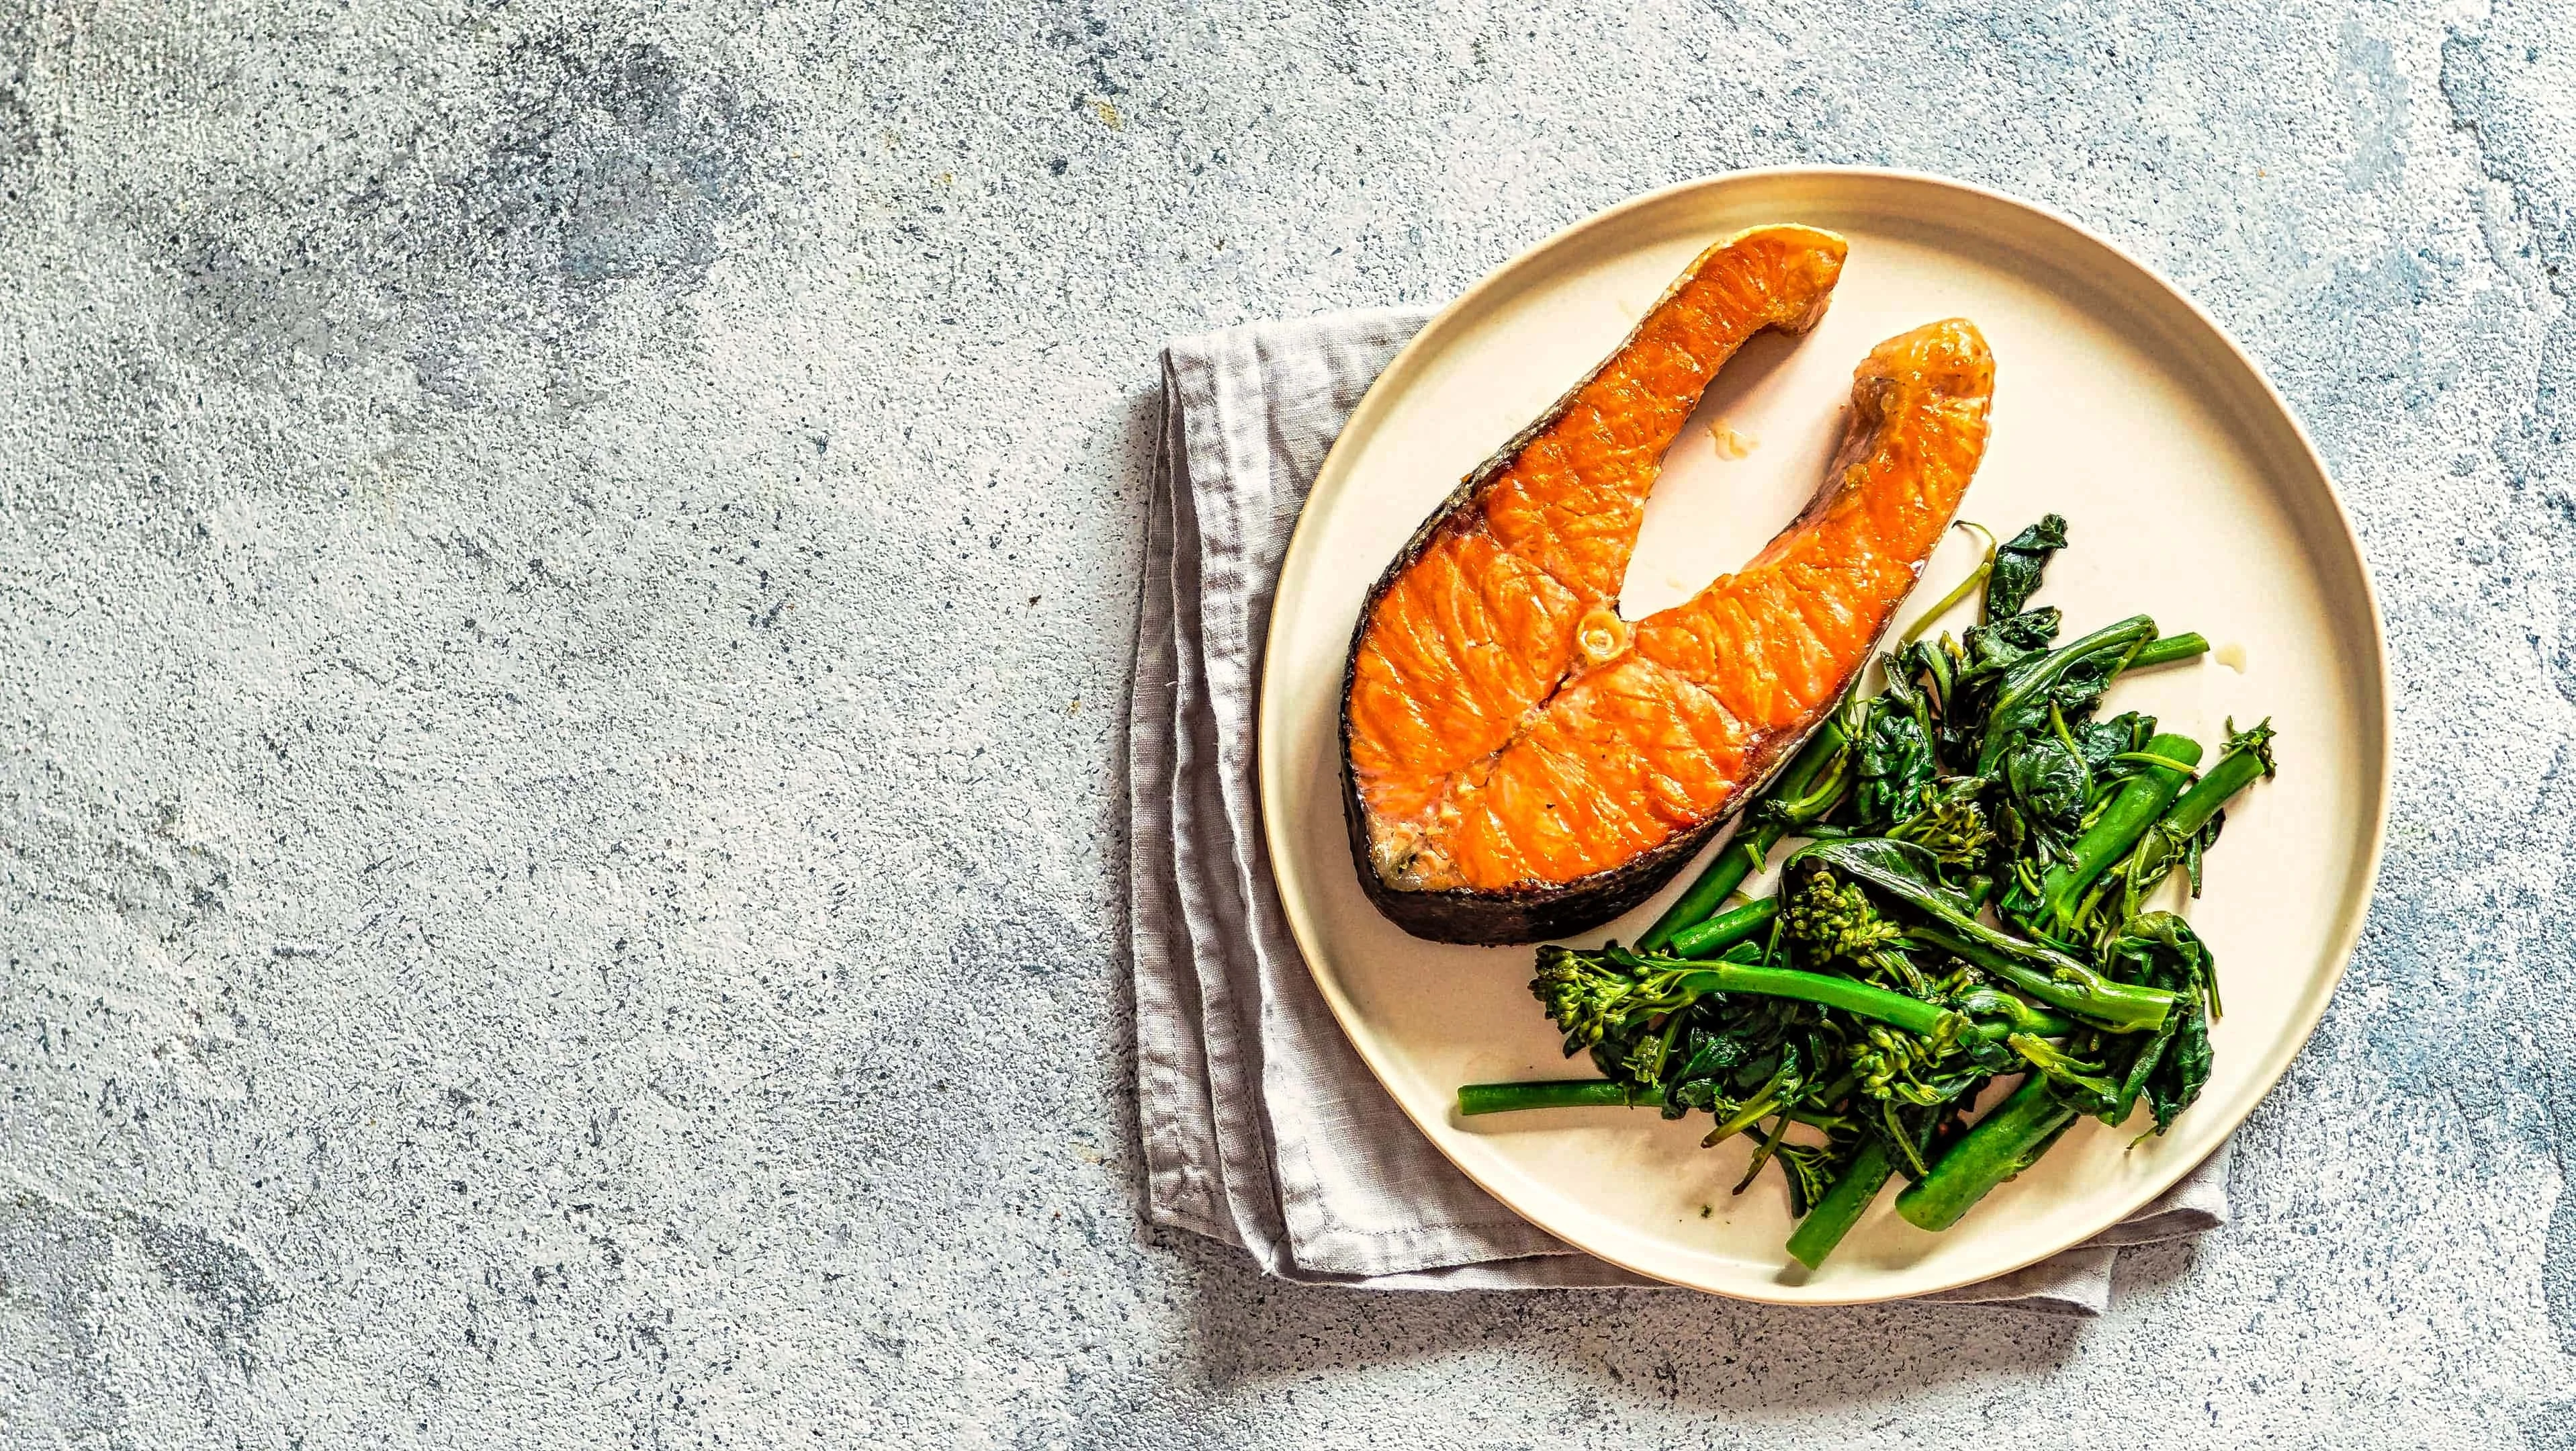 Grilled salmon steak with broccoli. Salmon is on our list of food for endomorph intermittent fasting.